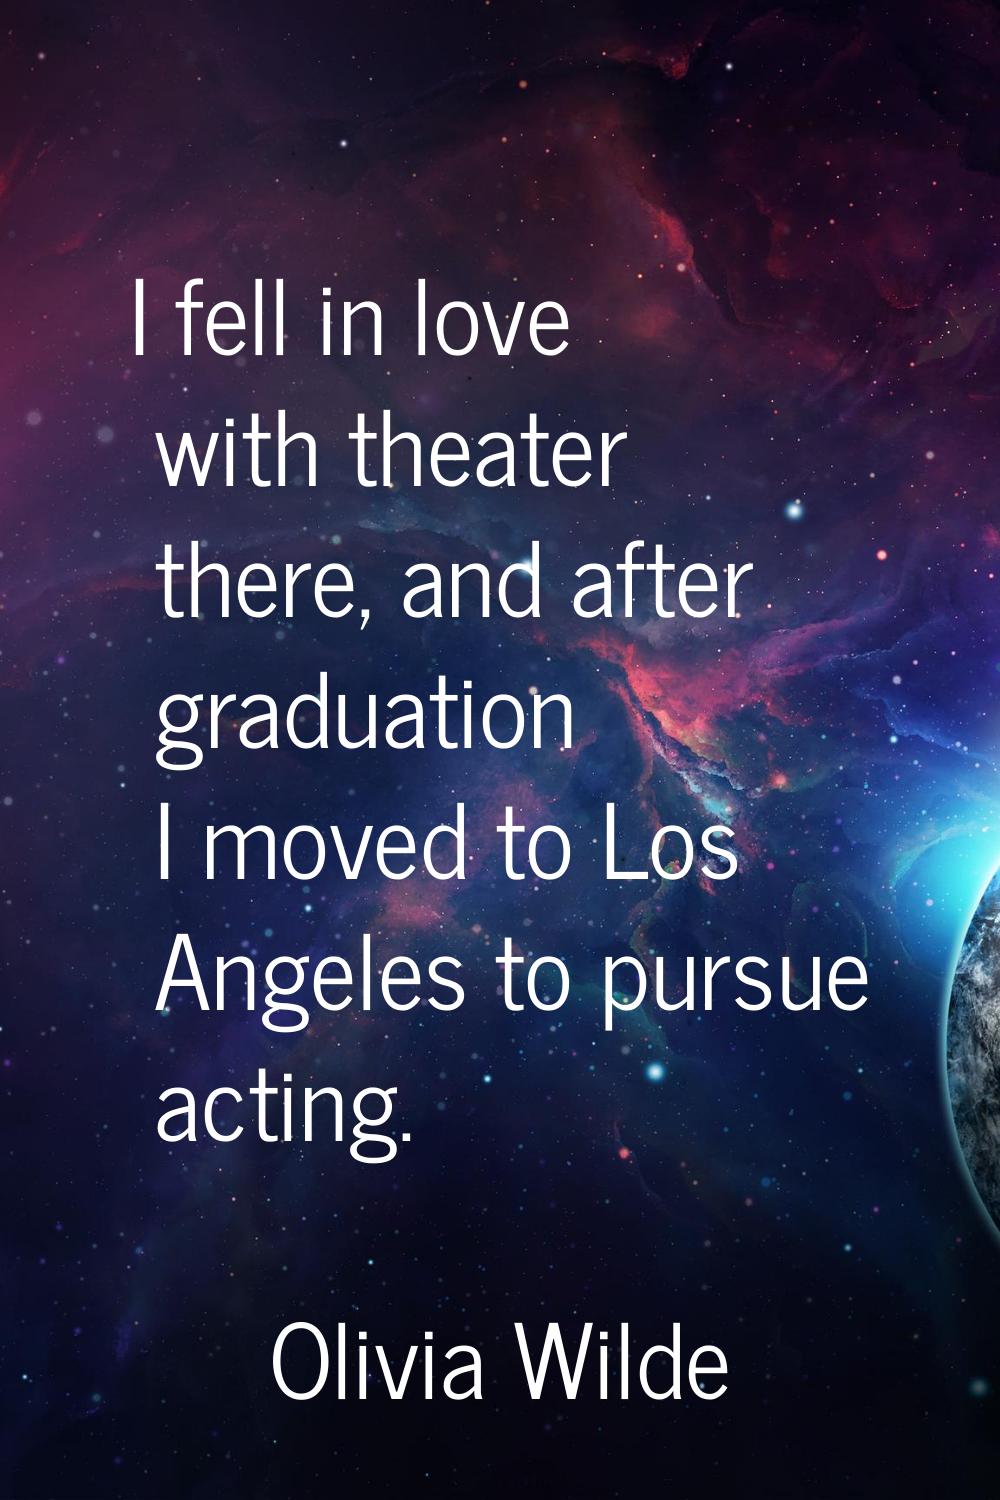 I fell in love with theater there, and after graduation I moved to Los Angeles to pursue acting.